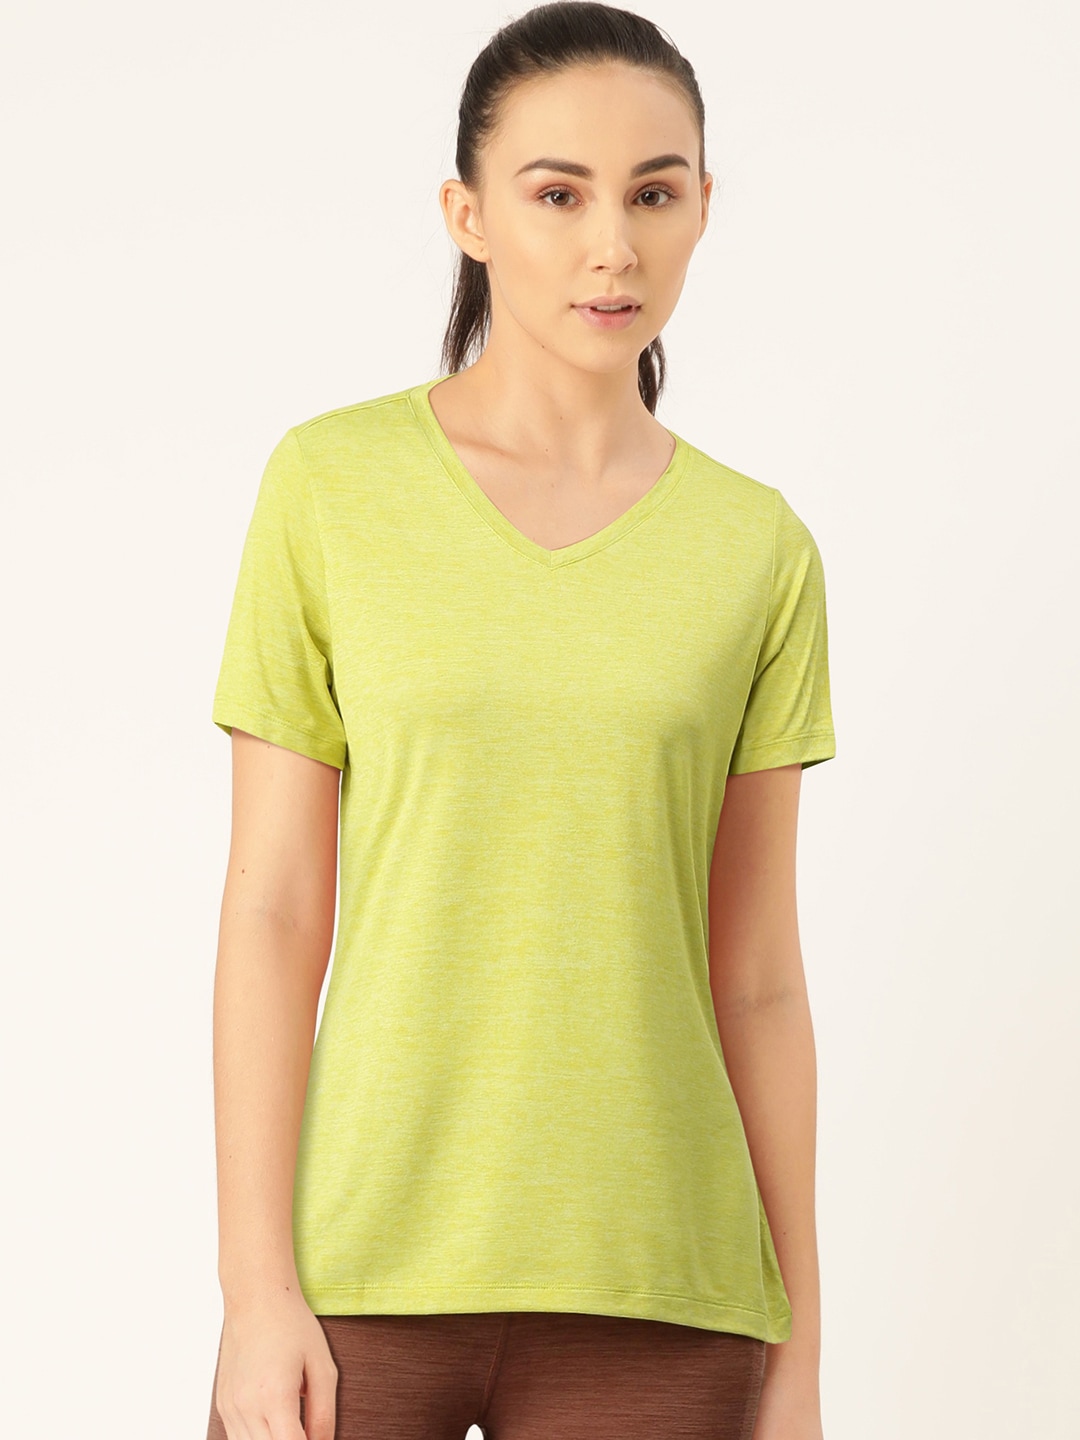 Jockey Women Lime Green Solid V-Neck T-shirt Price in India